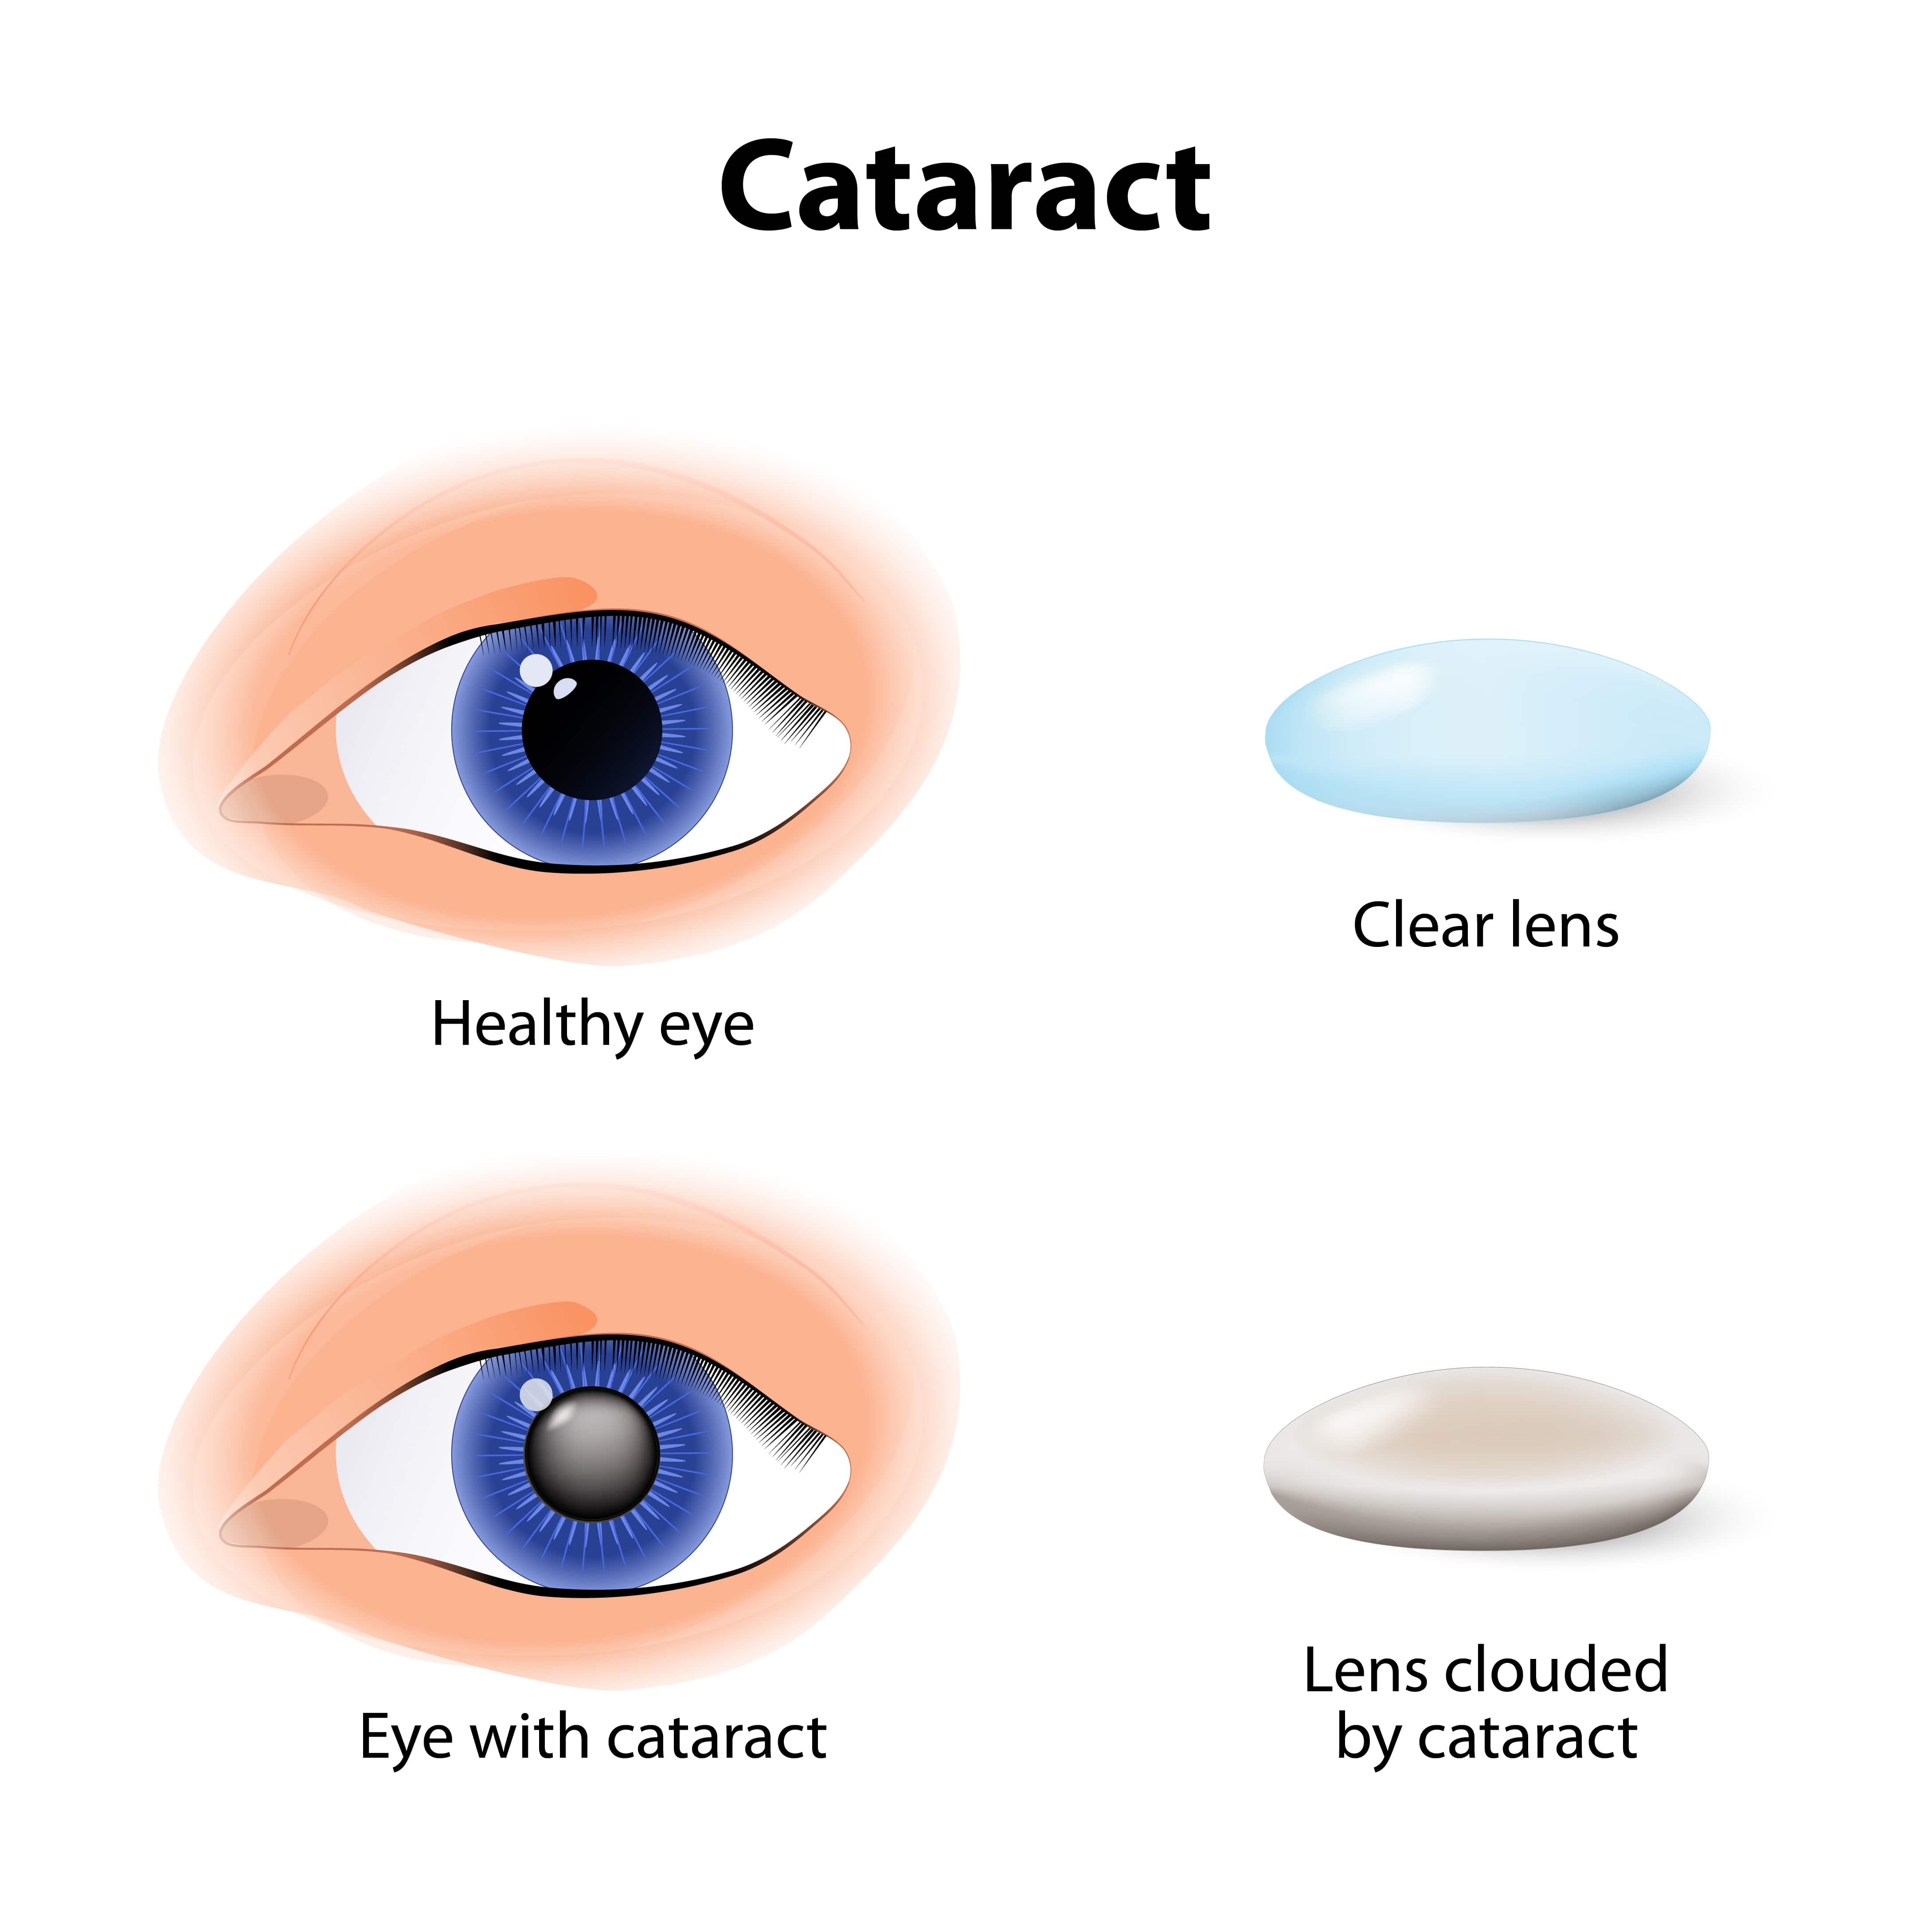 Image shows to eye illustrations. One eye has a clear lens with no cataract and the other eye has a cloudy lens with cataract.